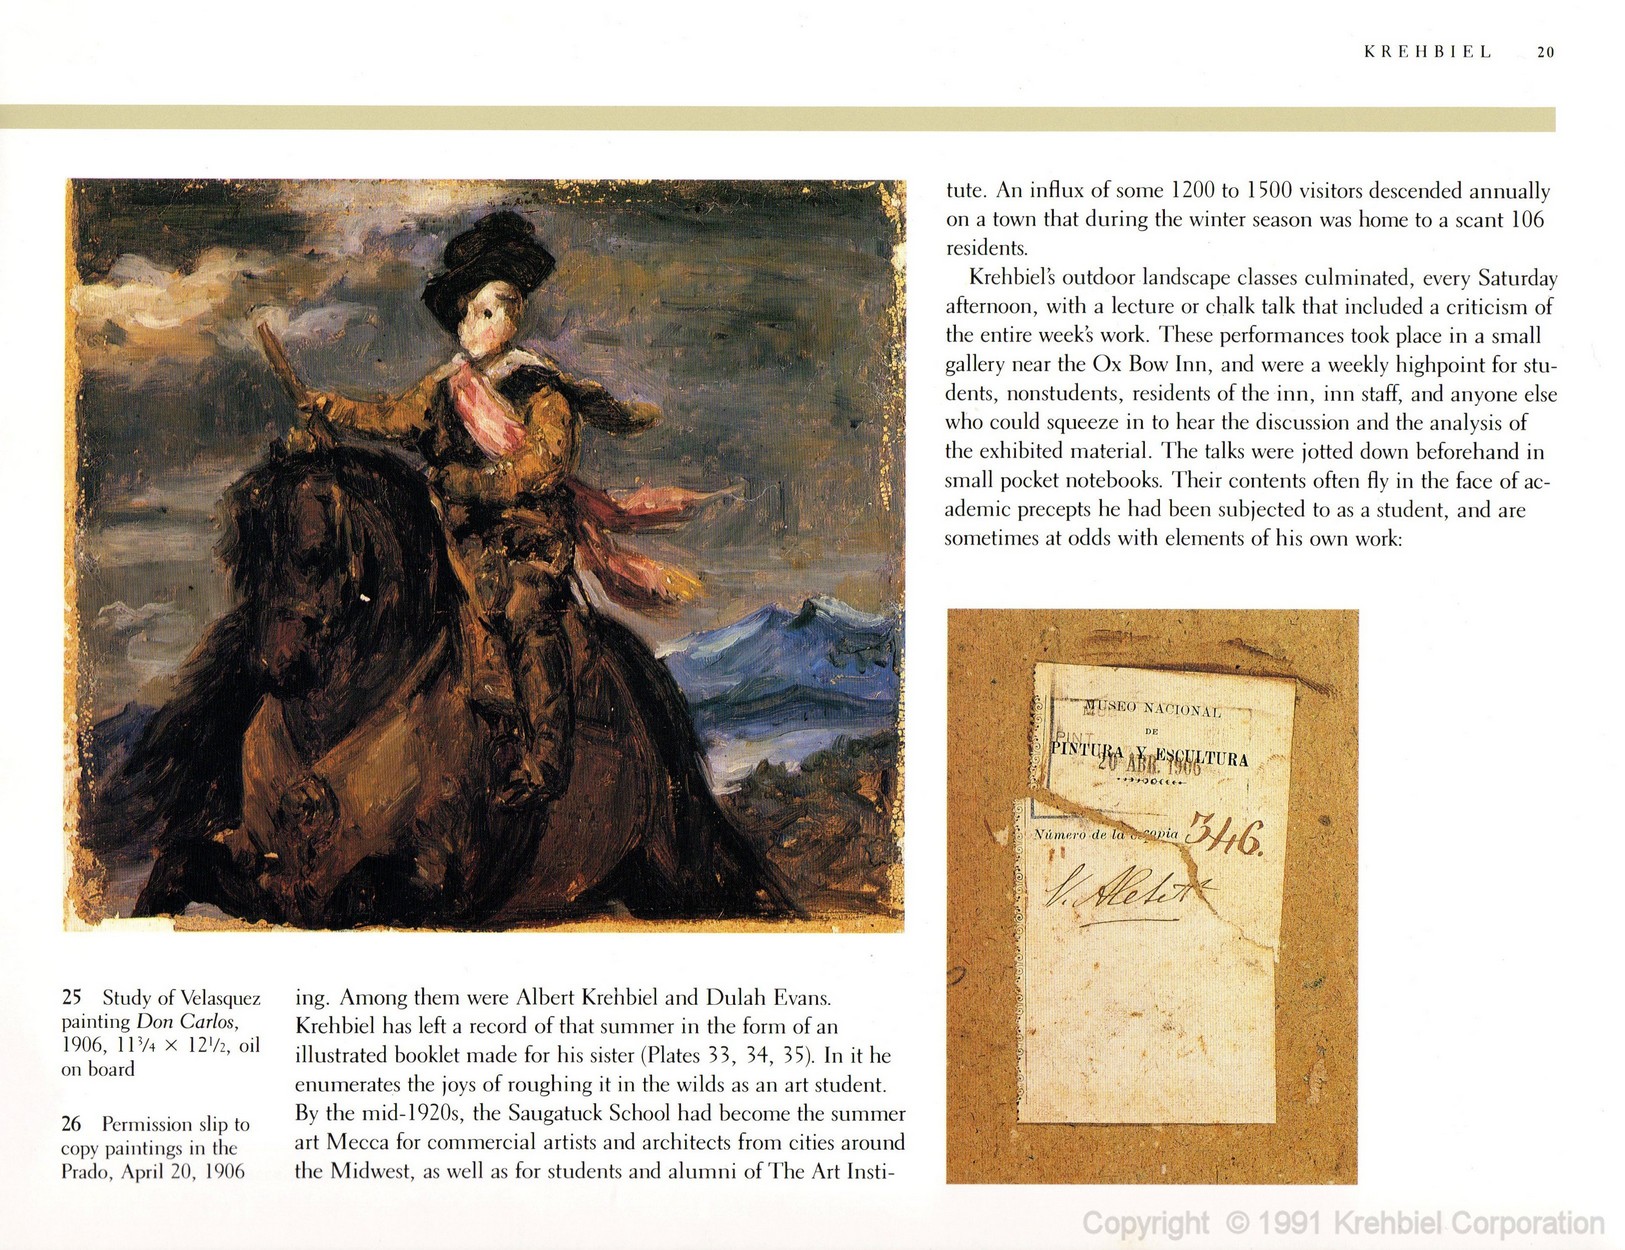 Page 20 of Krehbiel - Life and Works of an American Artist